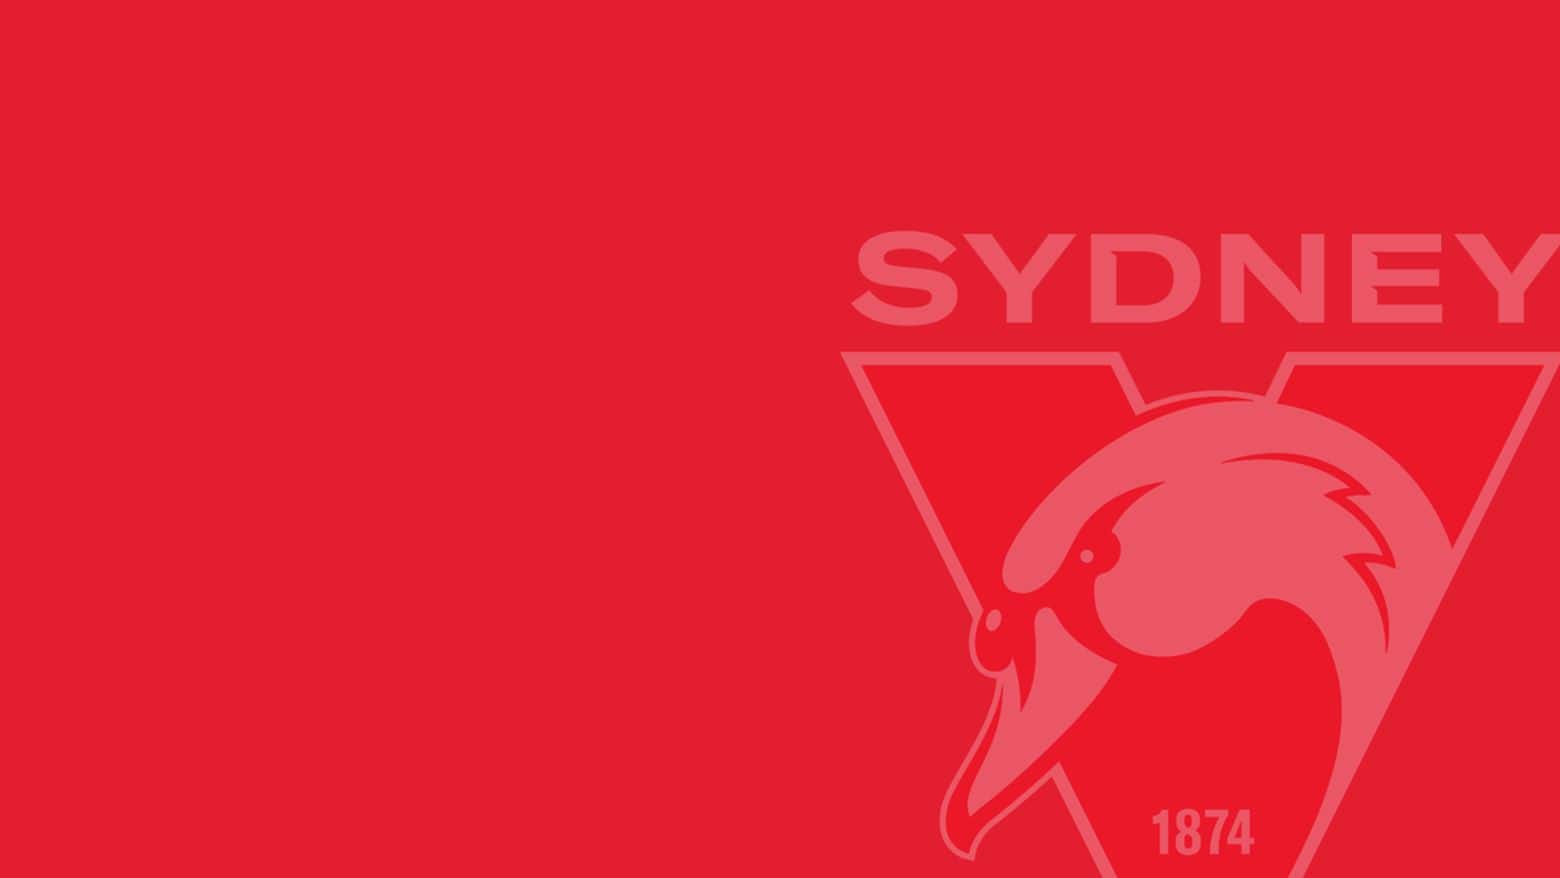 Sydney Swans Wallpapers